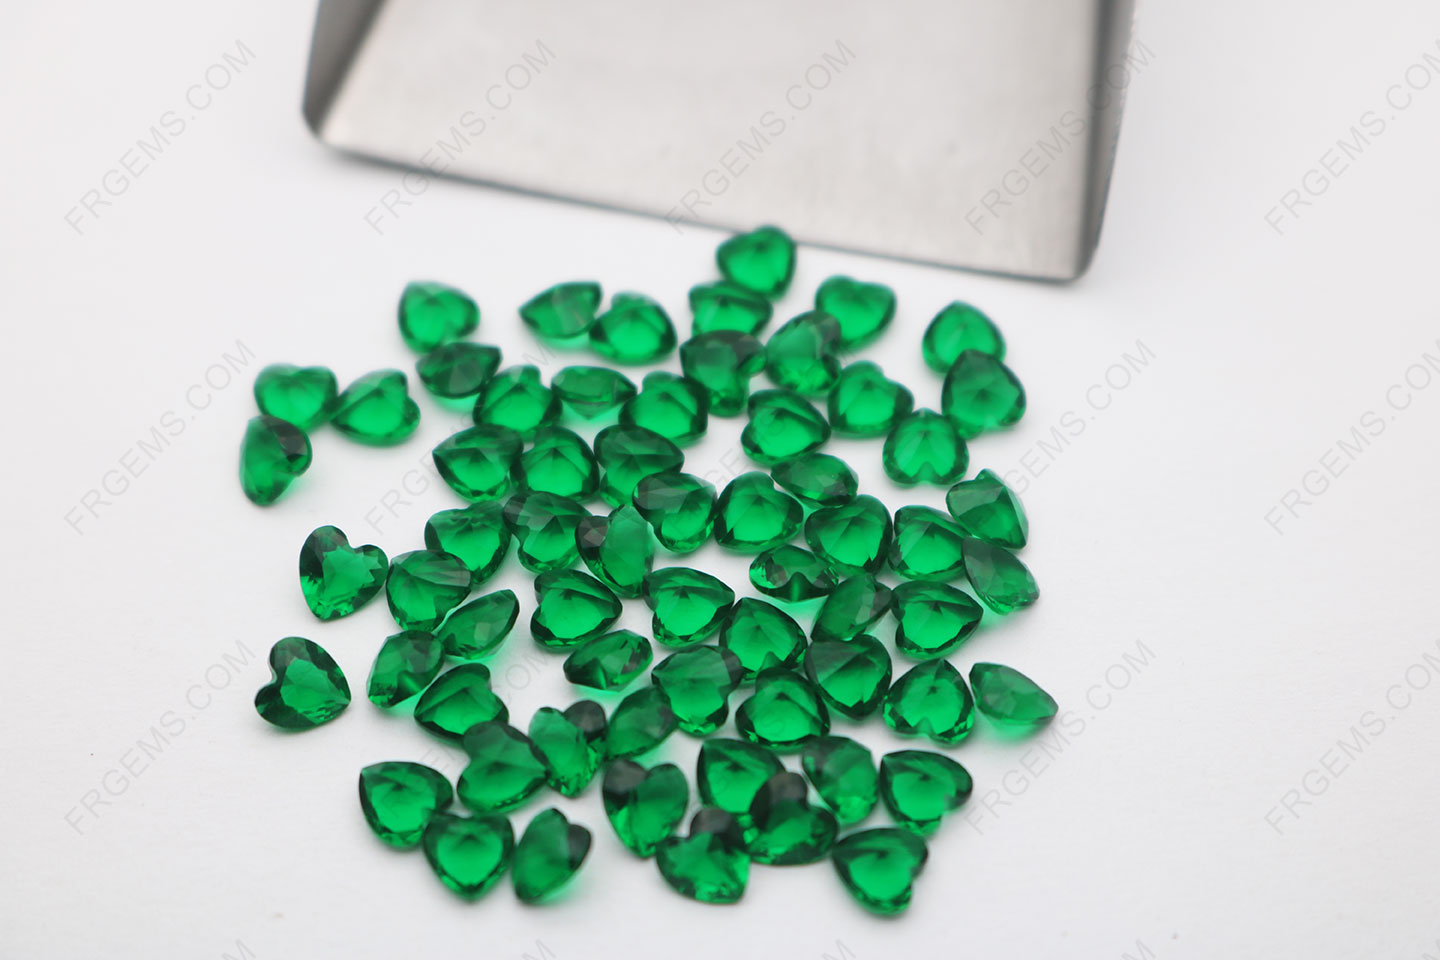 Glass Emerald Green BG01#  Heart shape Faceted cut 5x5mm Loose gemstones manufacturer in China